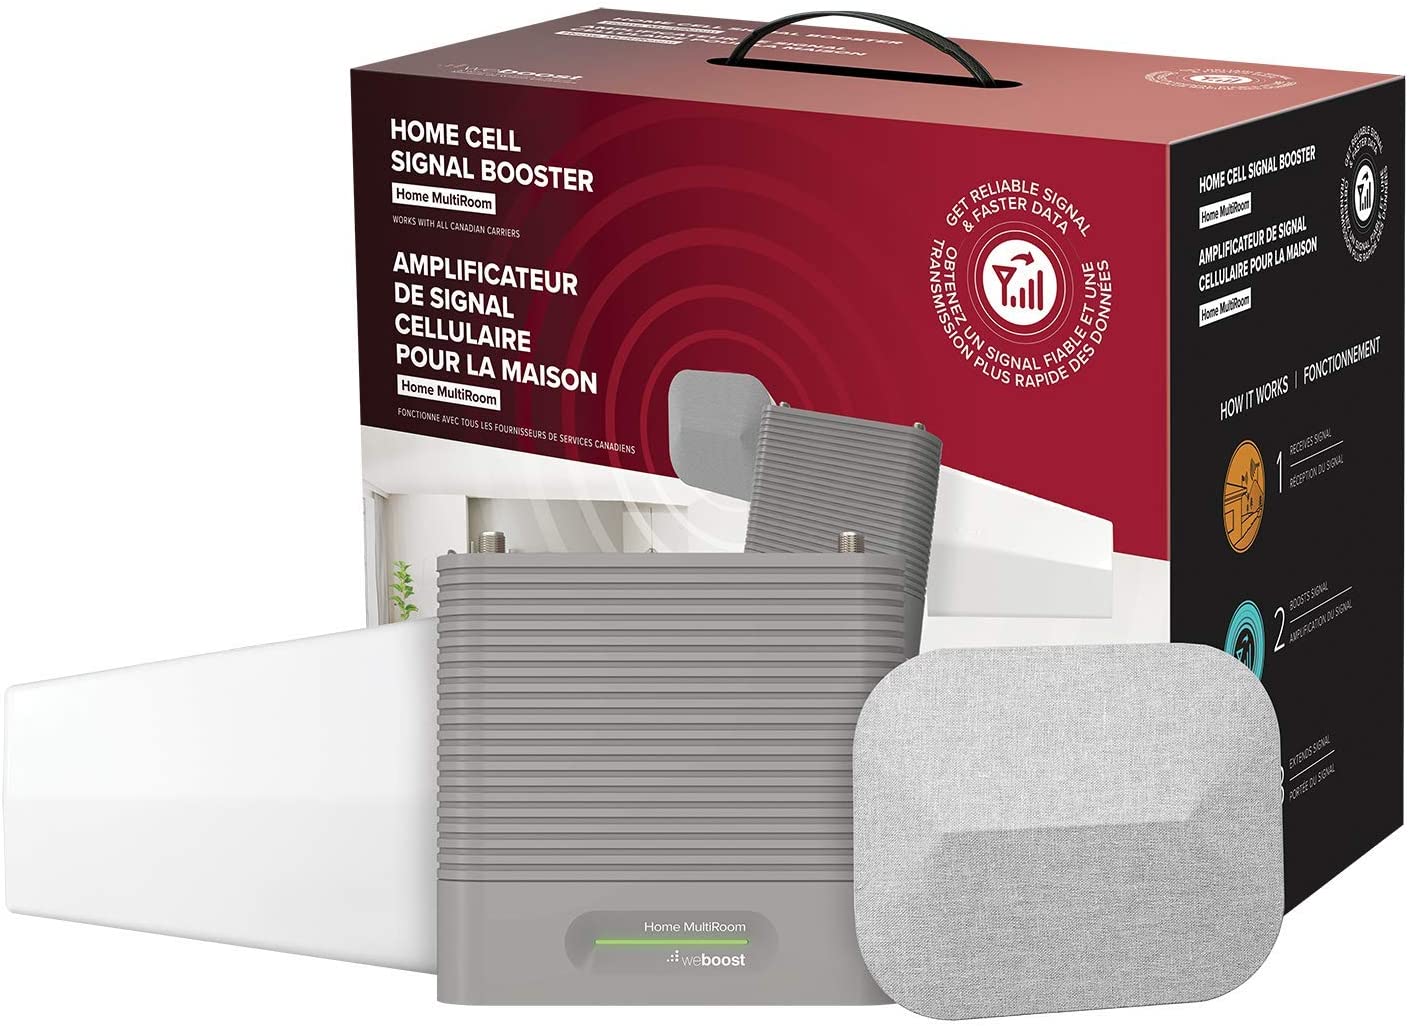 weBoost Home MultiRoom (650144) Cell Phone Signal Booster Kit | Up to 5,000 sq ft | All Canadian Carriers - Bell, Rogers, Telus | ISED Approved